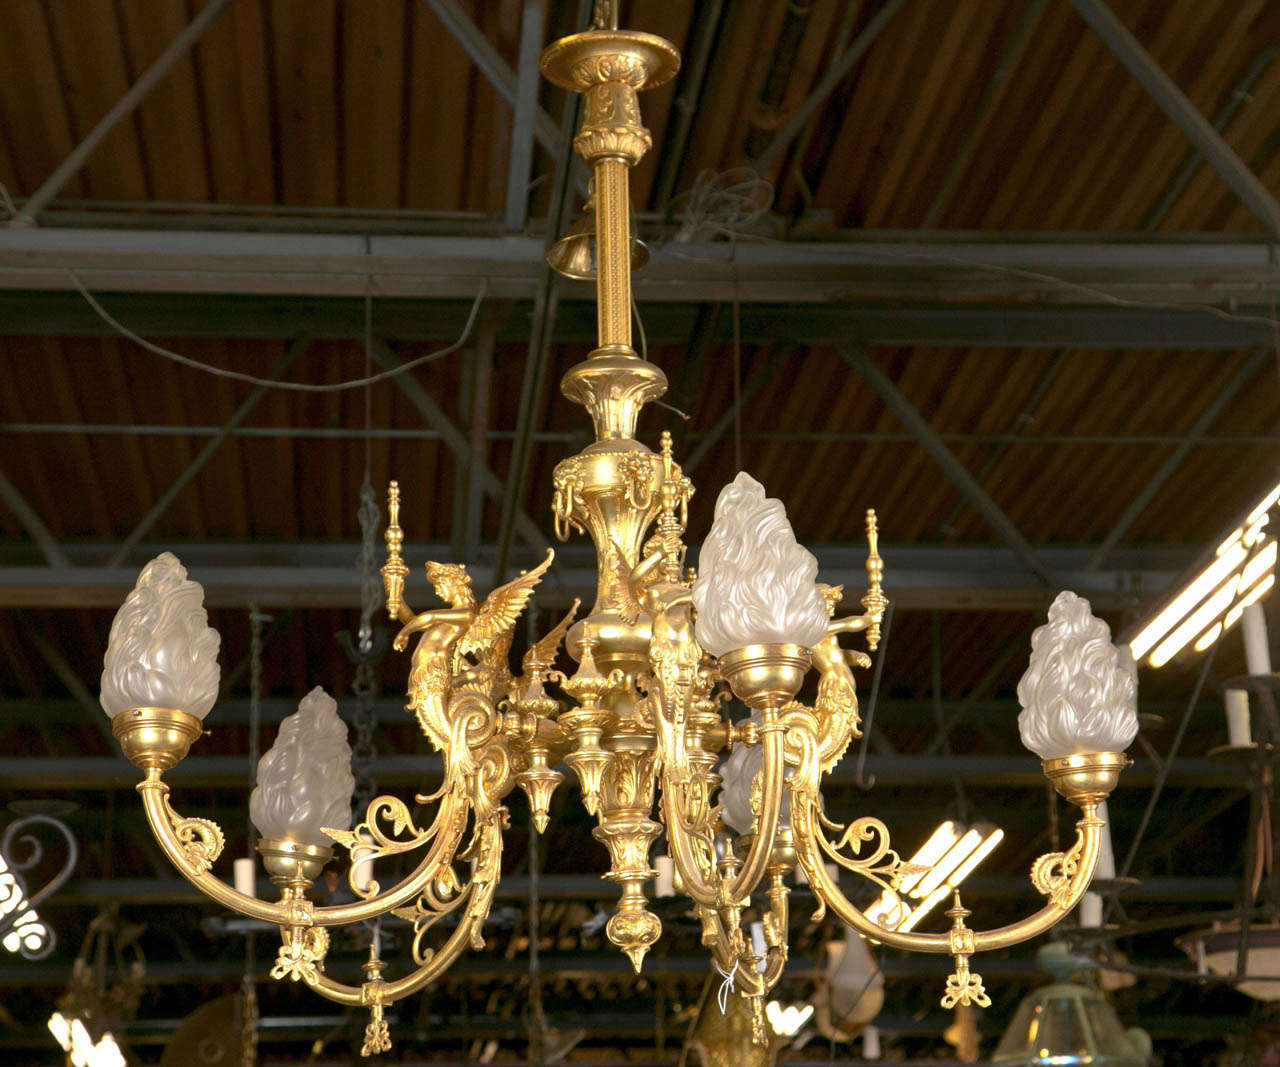 This chandelier is an old gas fixture converted to electric. It is a bronze five arm fixture depicting goddess bodies (like mermaids with wings). Each fairy like goddess is holding a torch.  Surrounding the winged goddess are acanthus leaves in